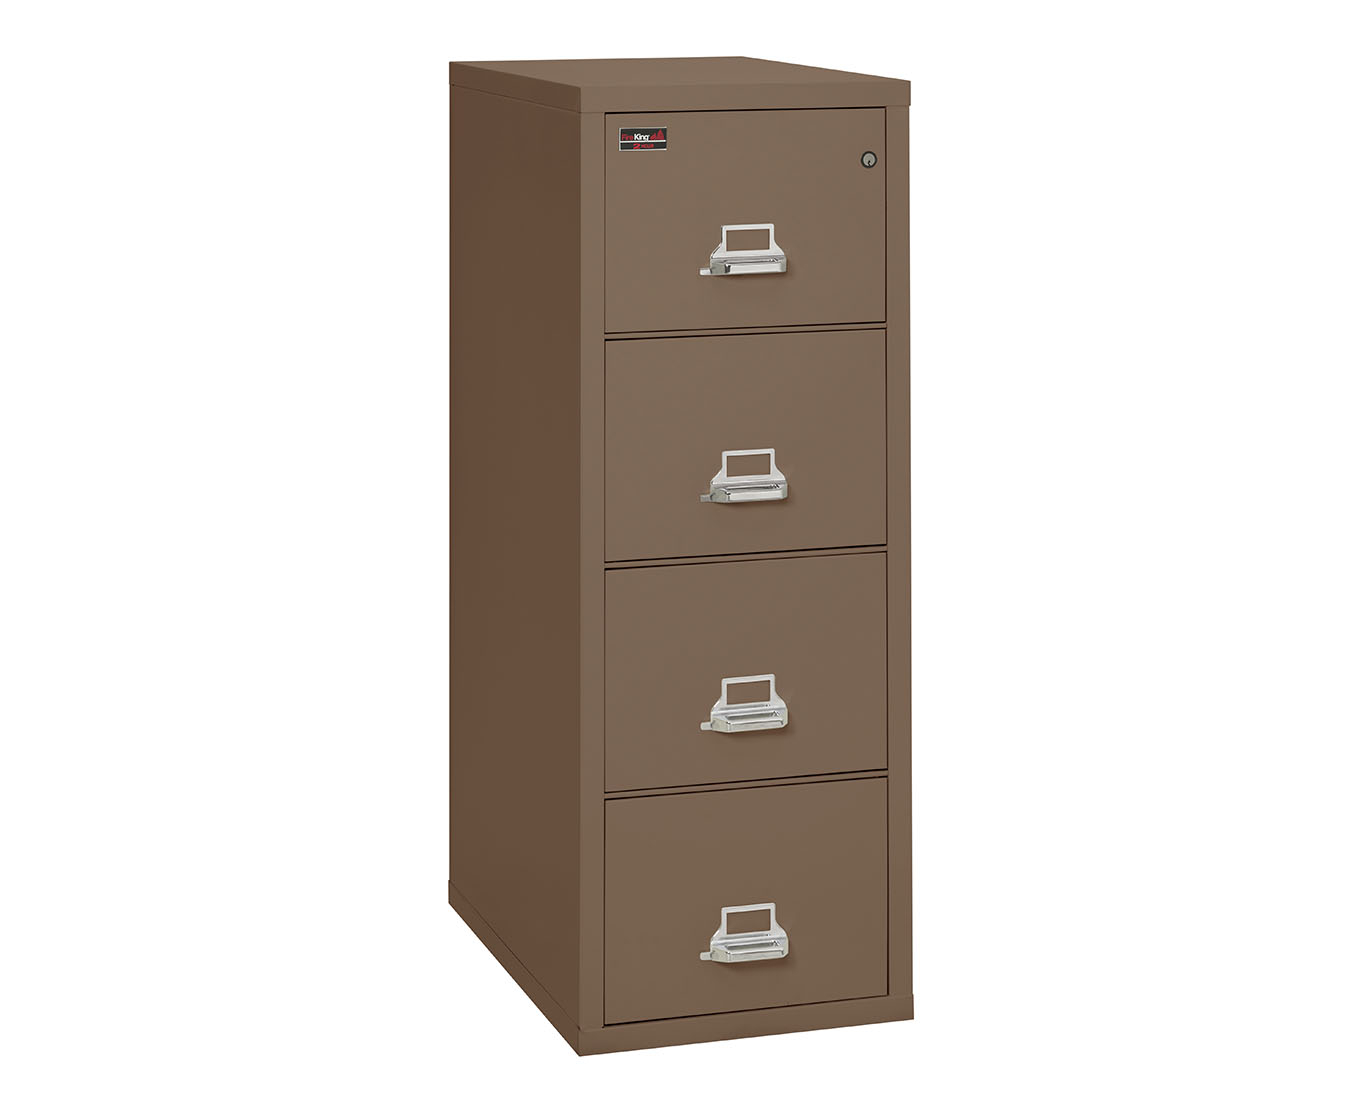 Fireproof File Cabinets 2 Hour Rated Fireking intended for measurements 1366 X 1110